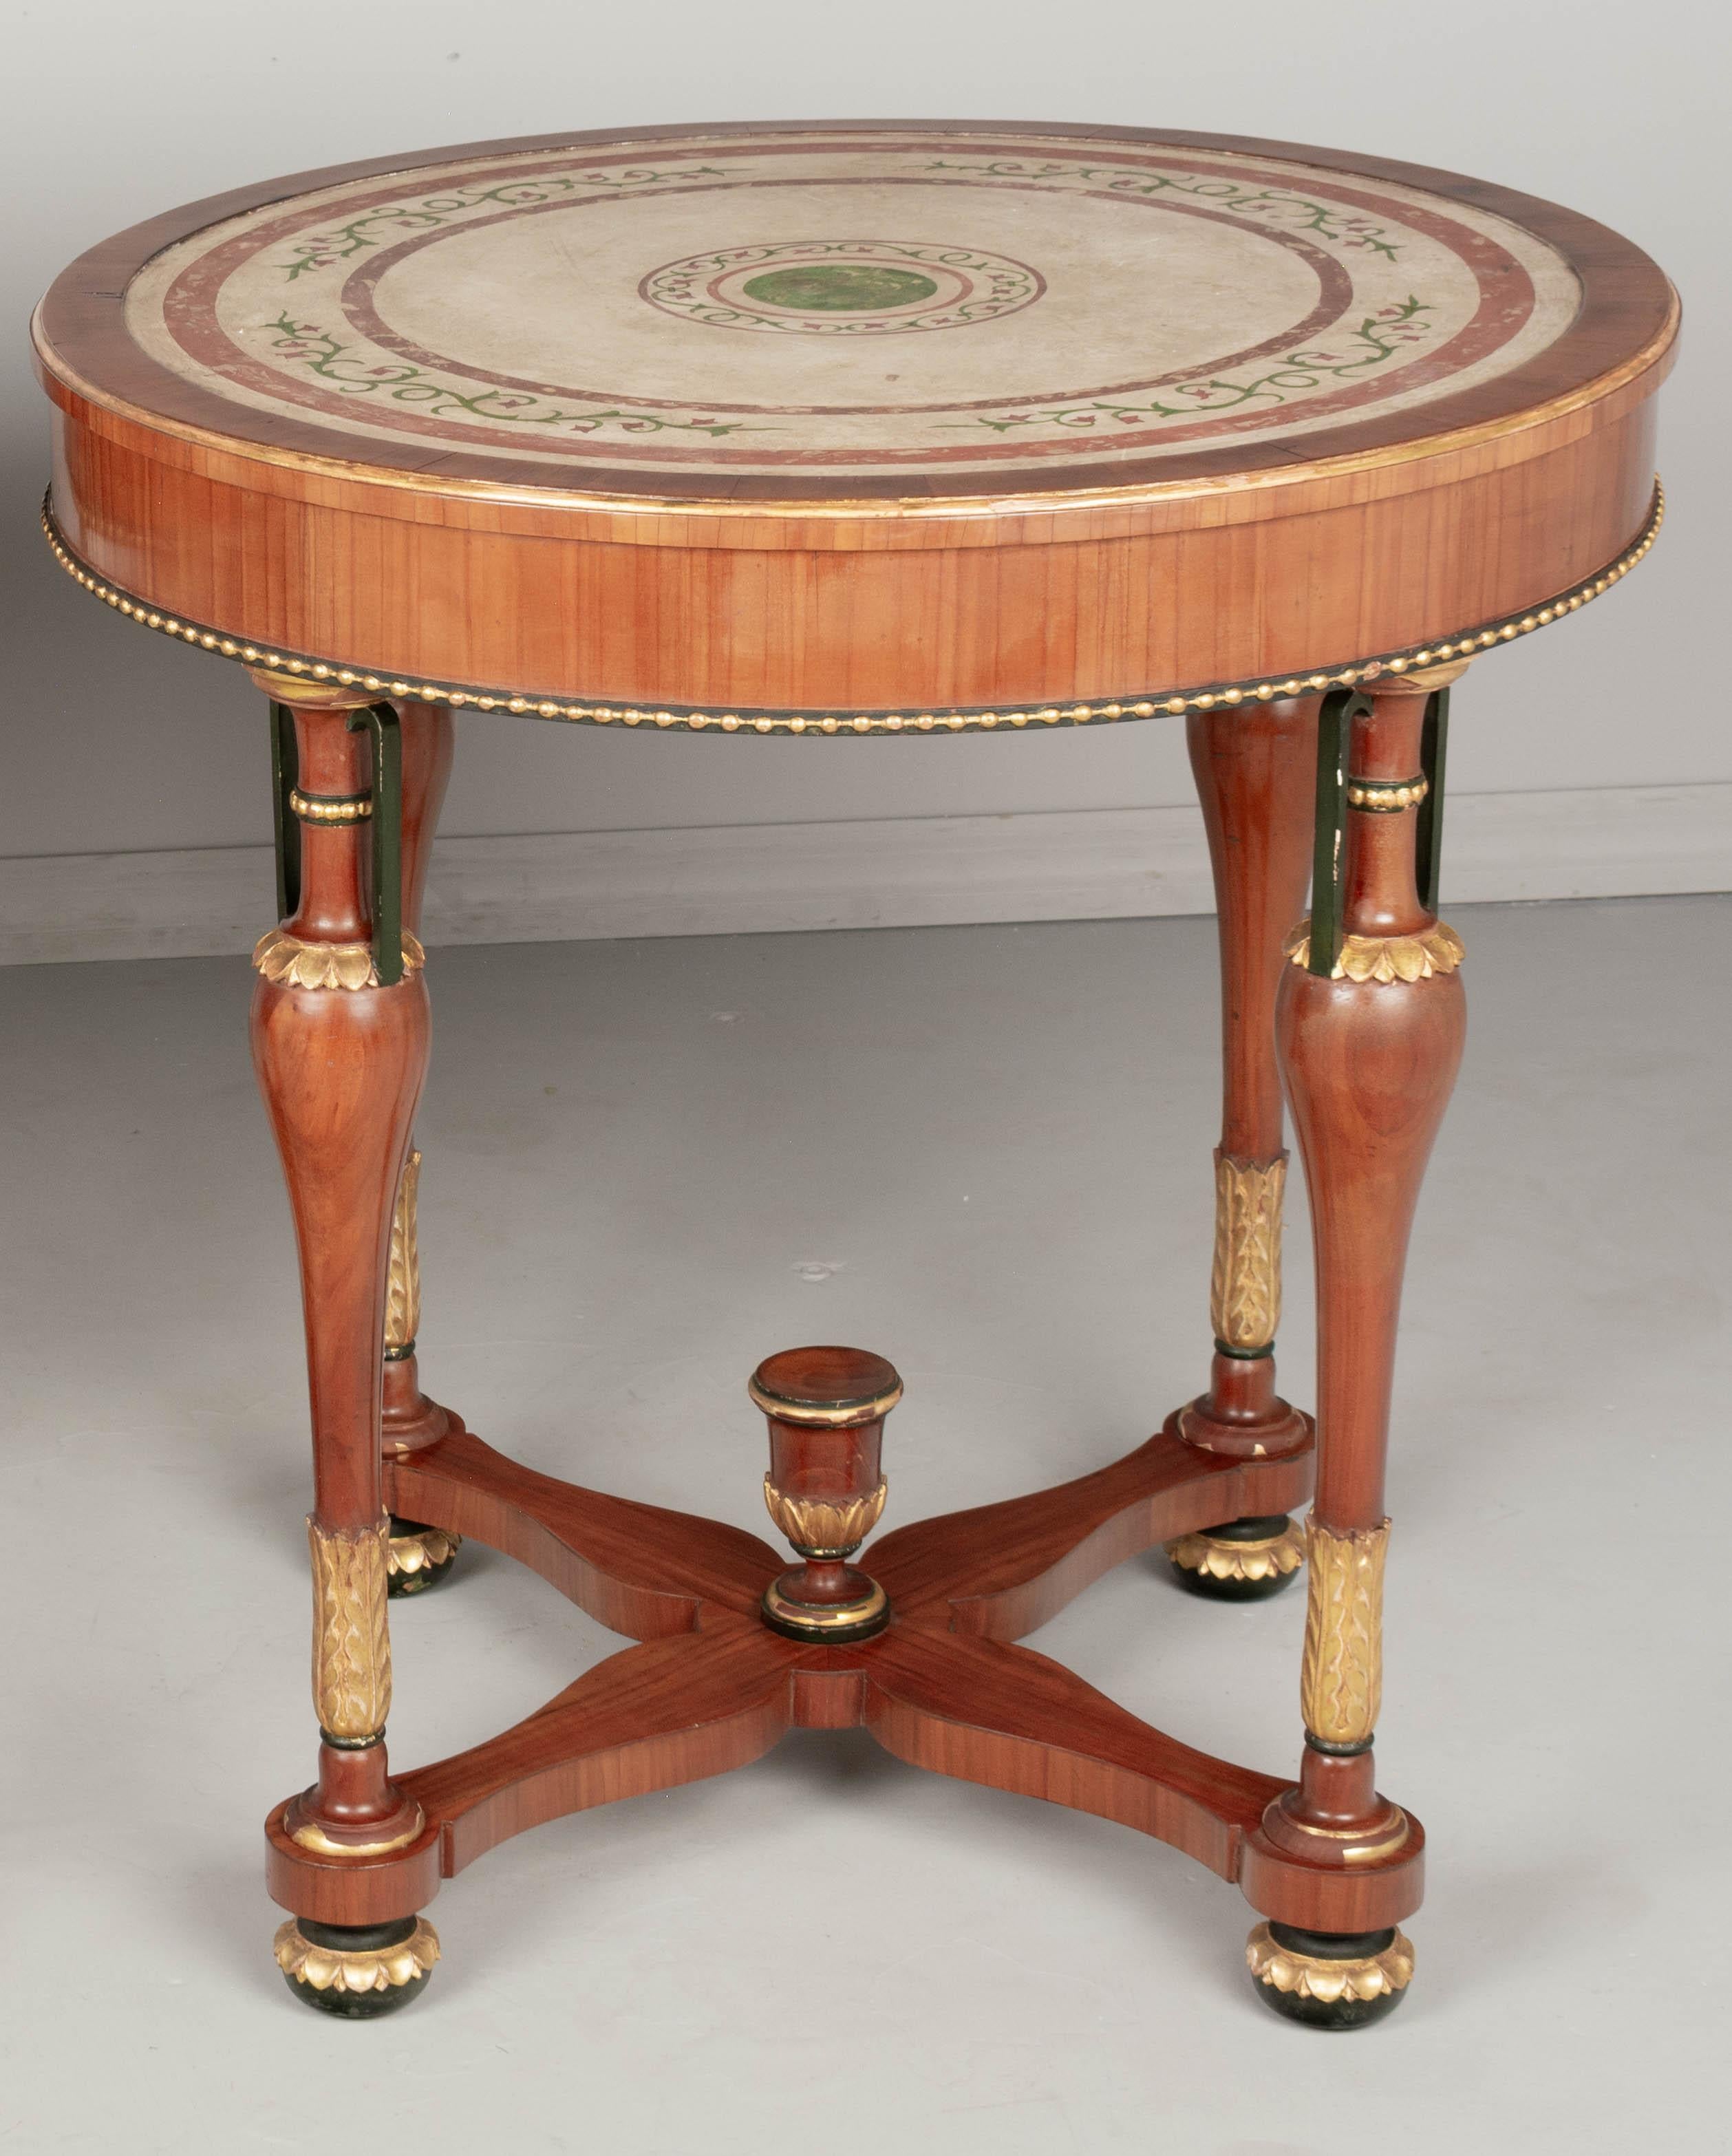 Hand-Crafted Italian Neoclassical Scagliola Top Center Table For Sale